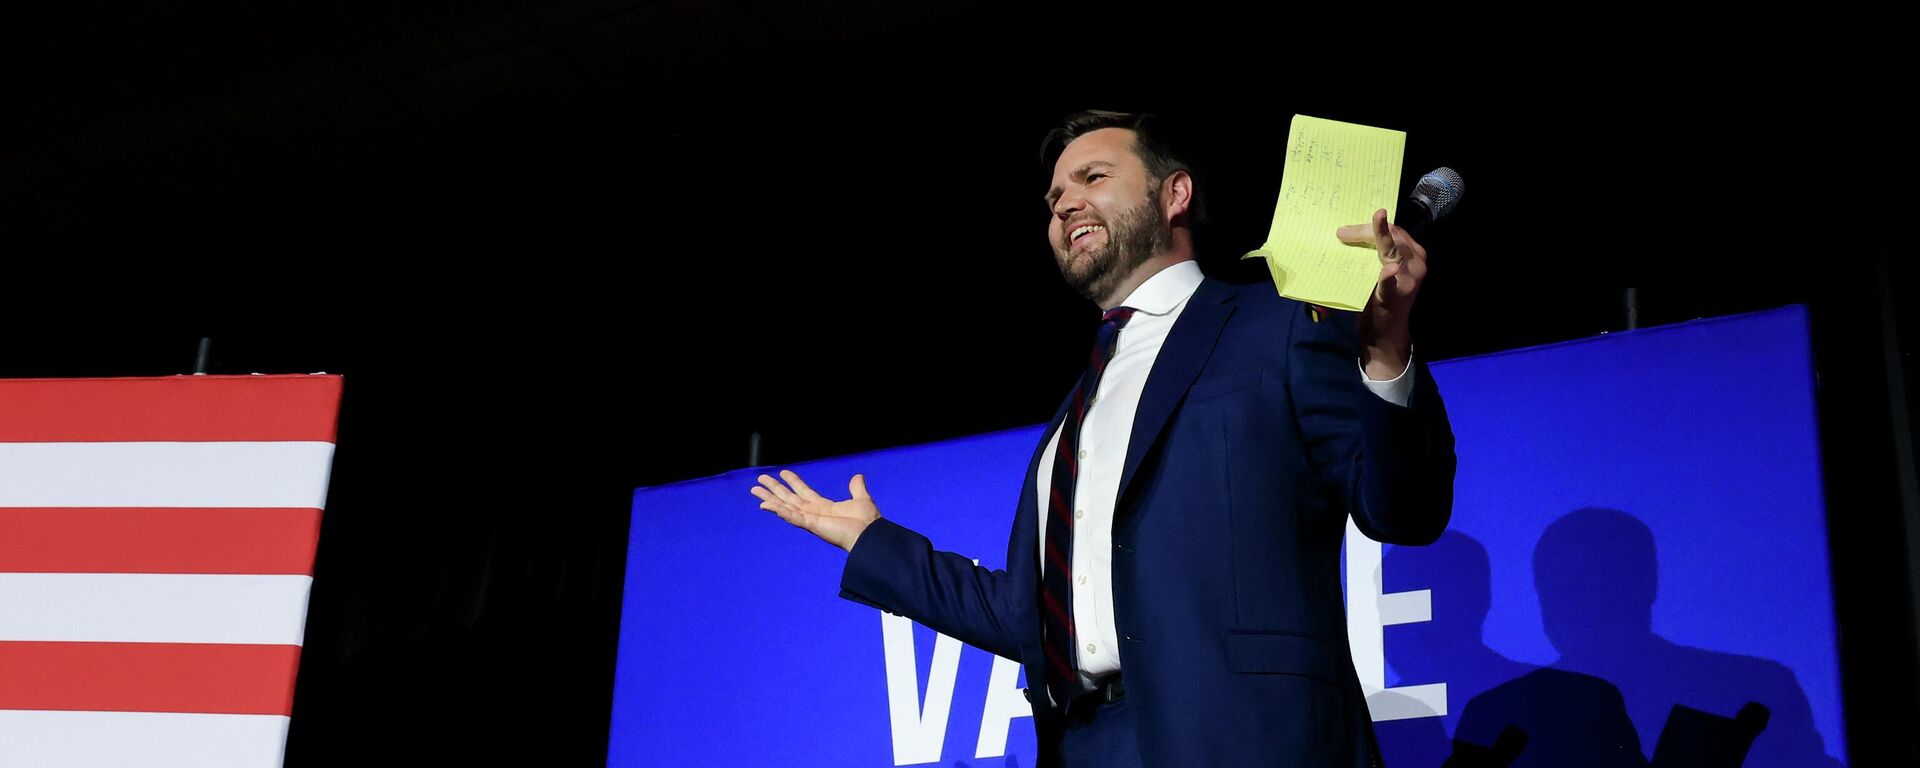 Republican Senate candidate JD Vance takes the stage as he prepares to speak during an election night watch party, Tuesday, May 3, 2022, in Cincinnati.  - Sputnik International, 1920, 23.10.2023